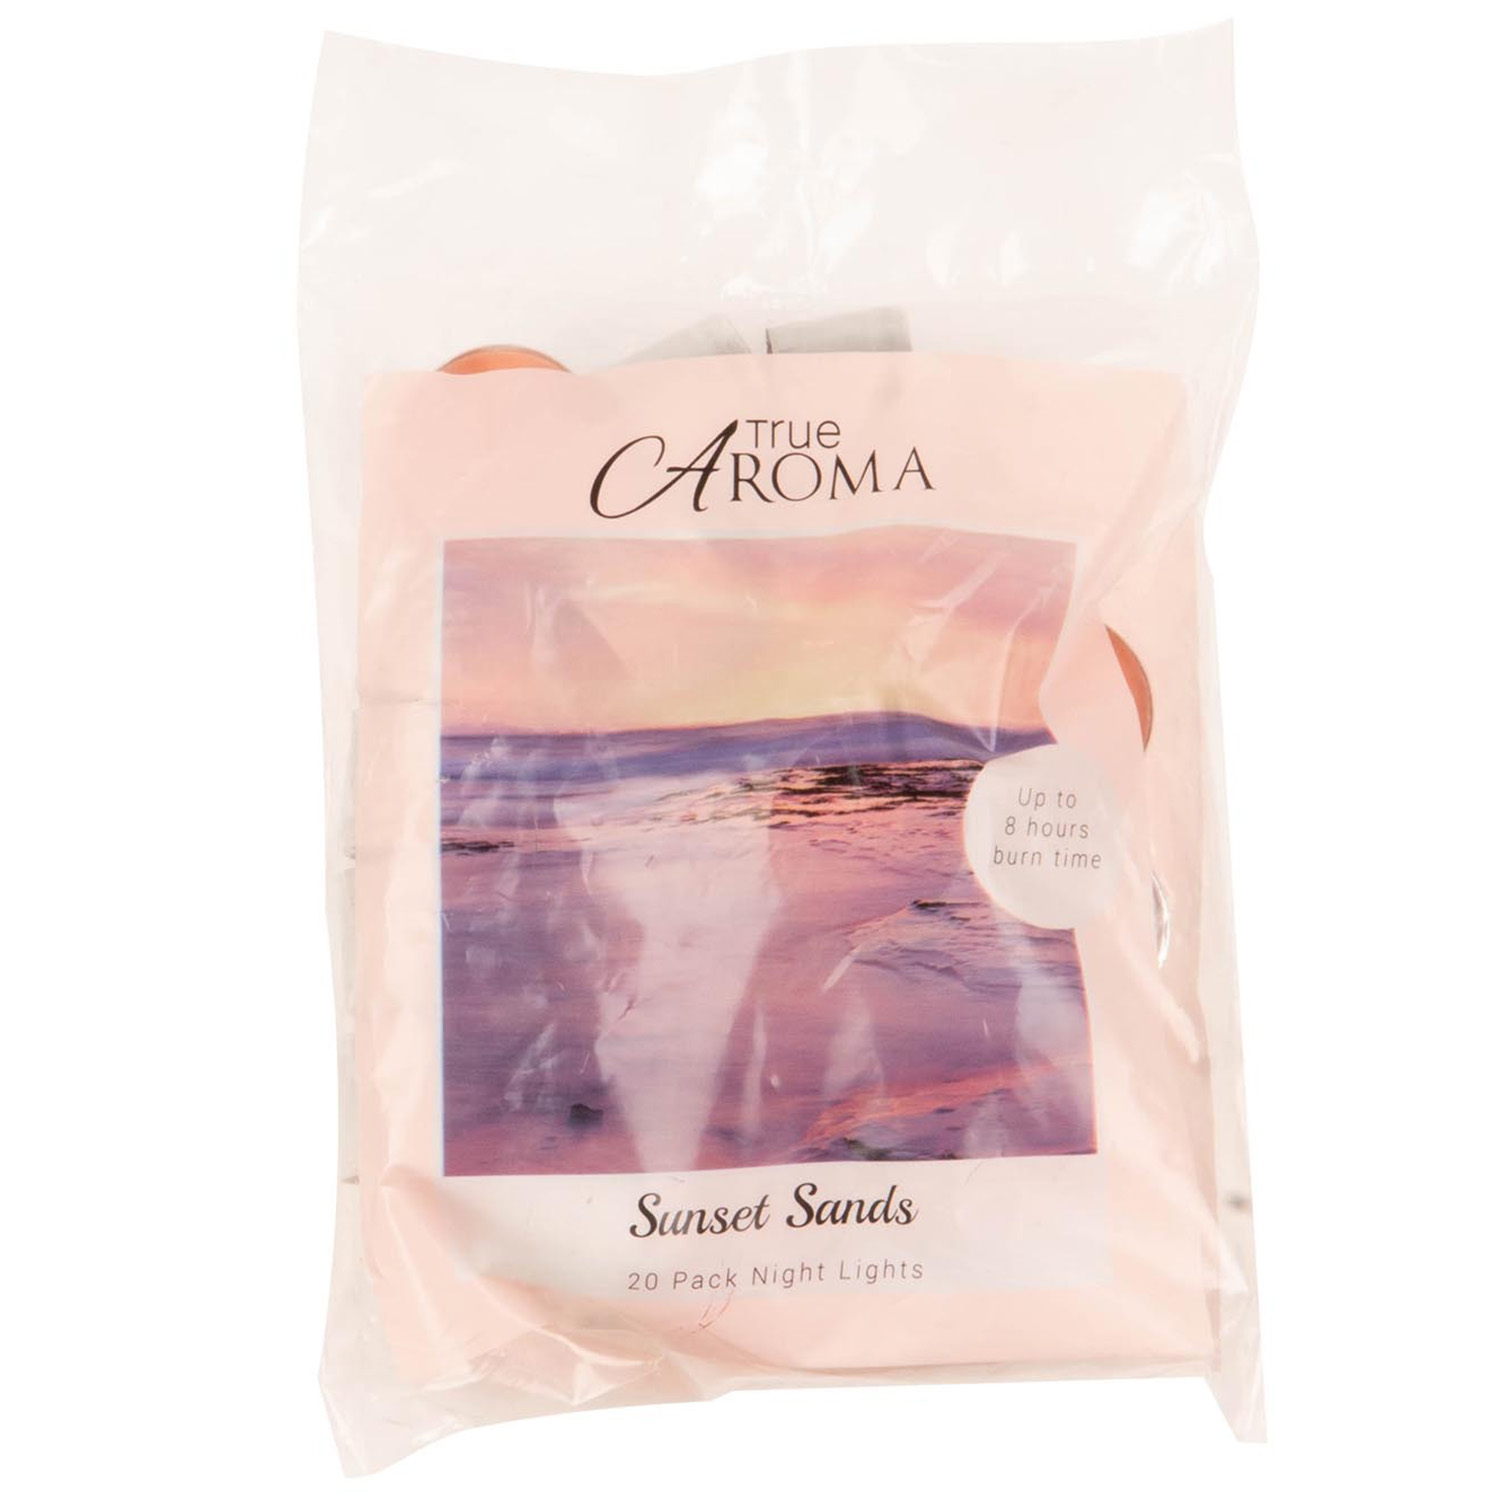 True Aroma Sunset Sands Tealight Candles 20 Pack Image